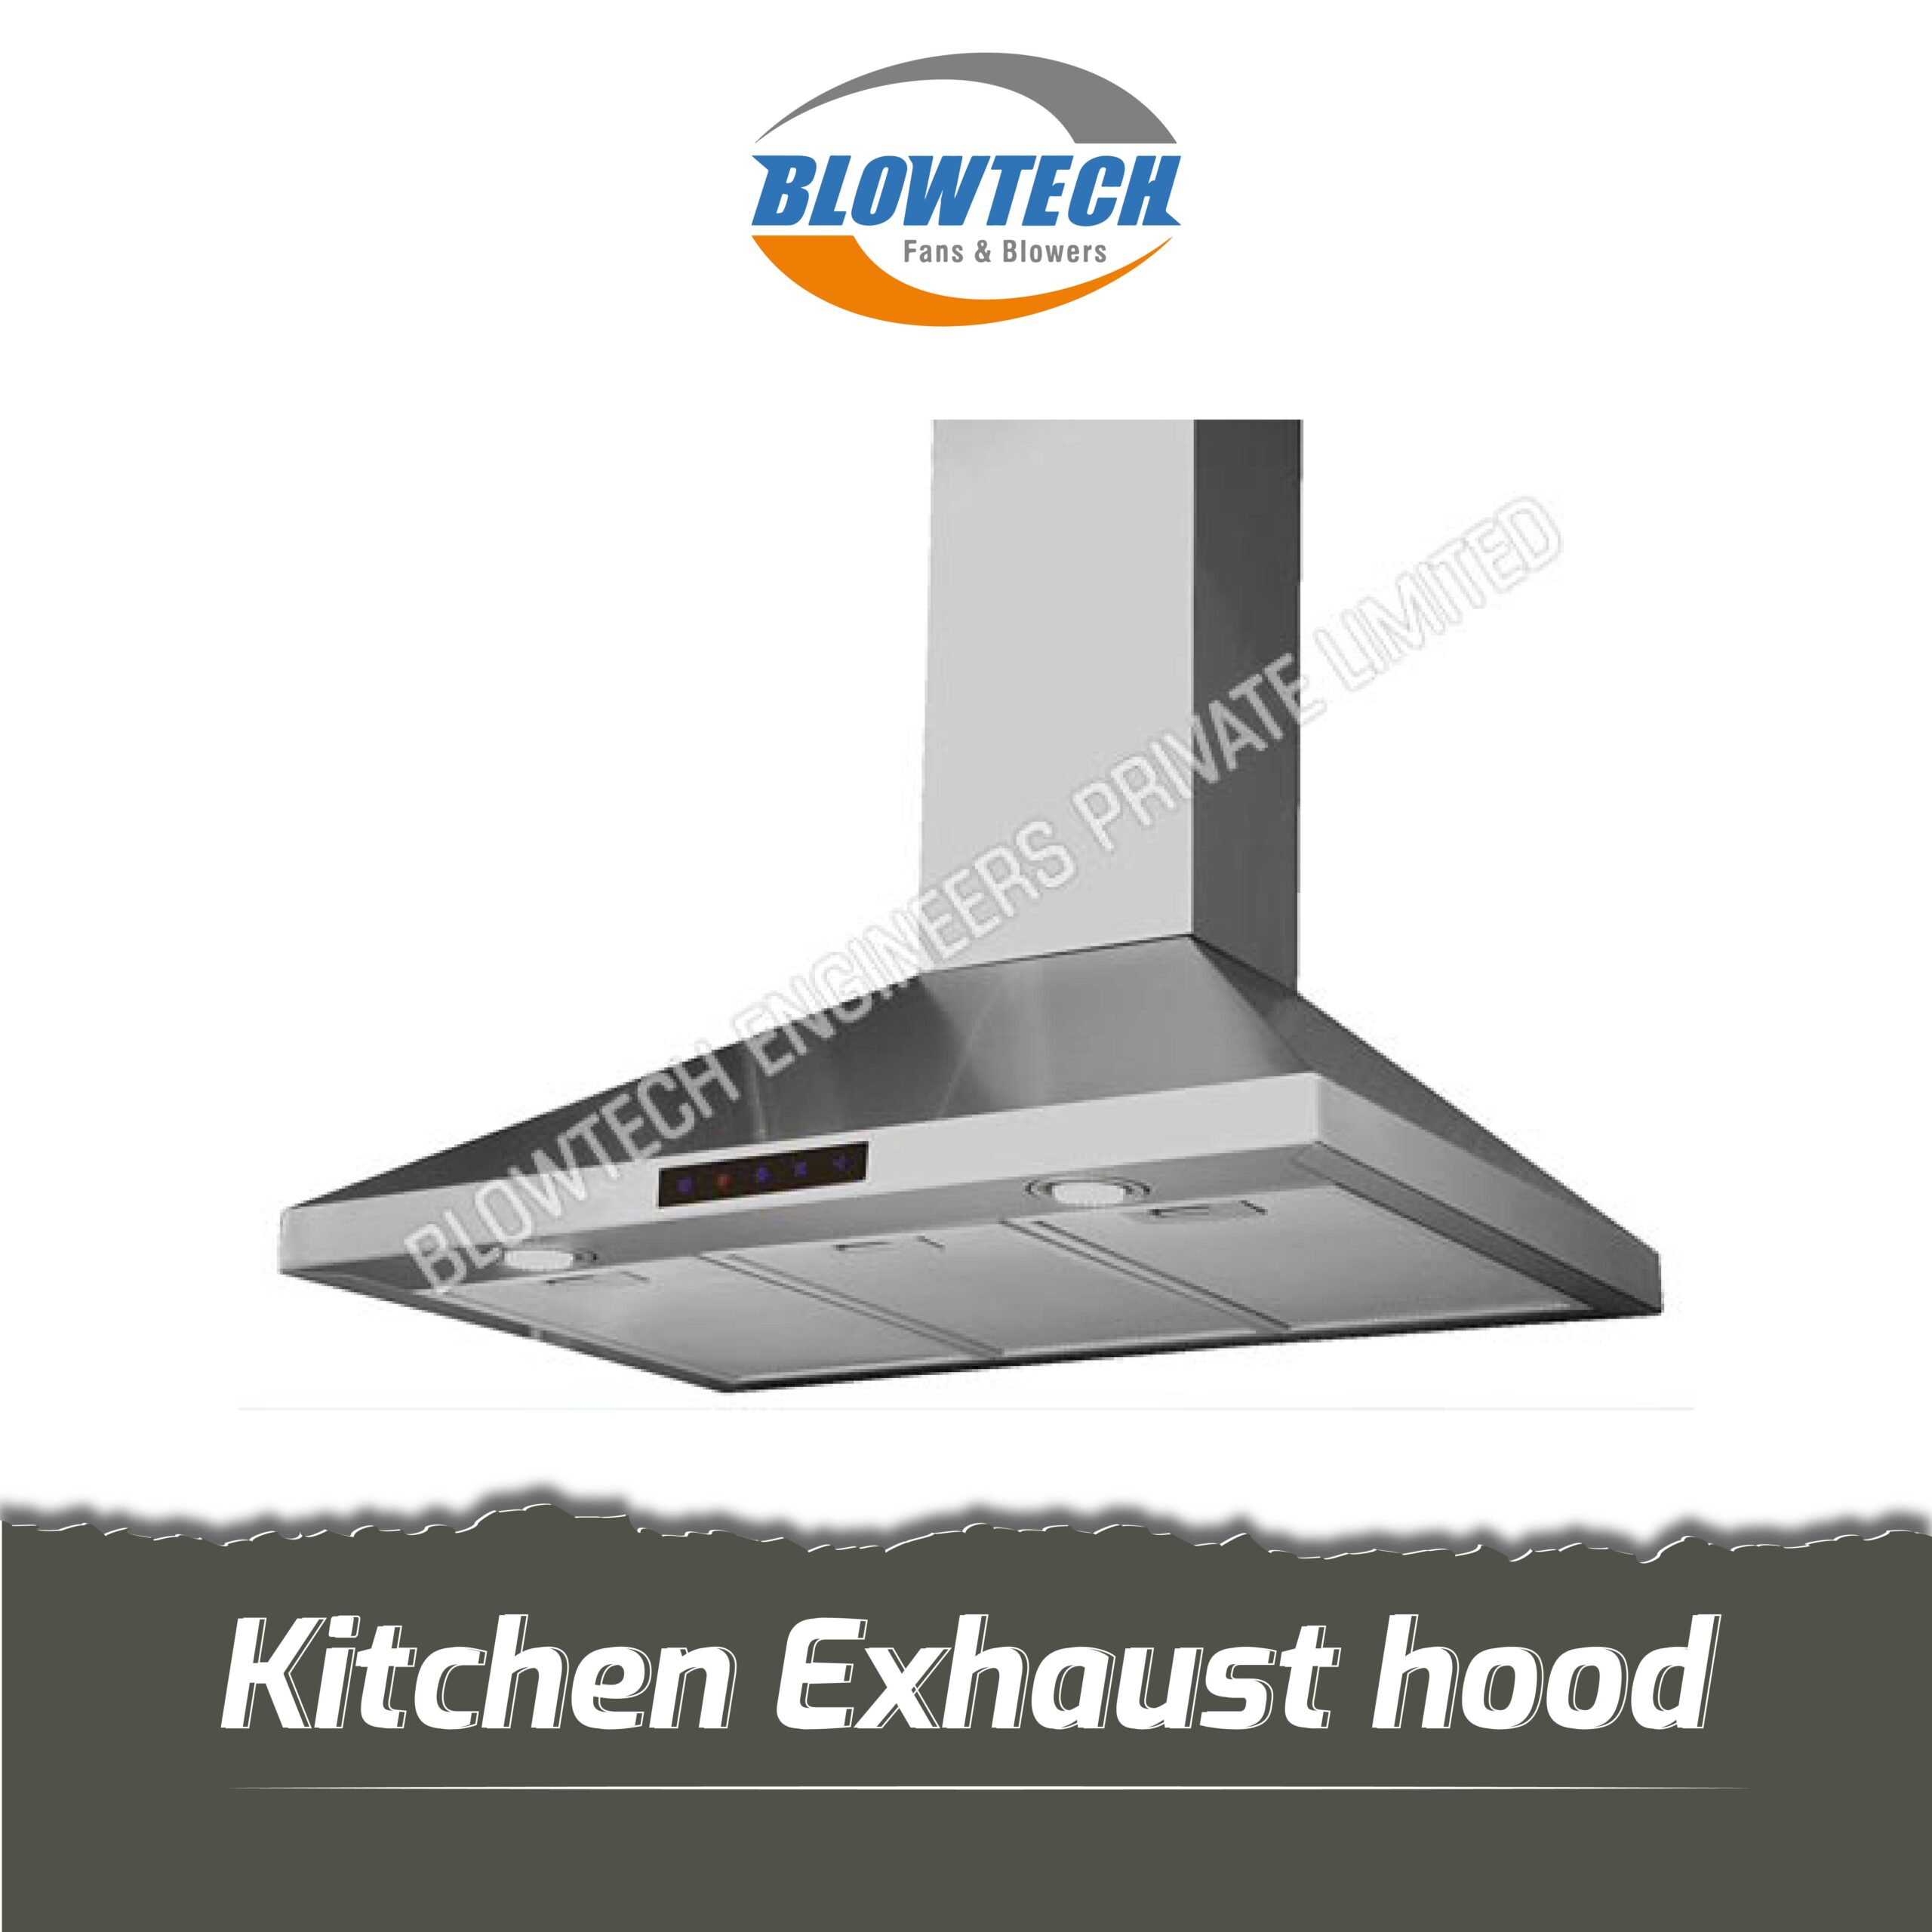 Kitchen Exhaust hood  manufacturer, supplier and exporter in Mumbai, India